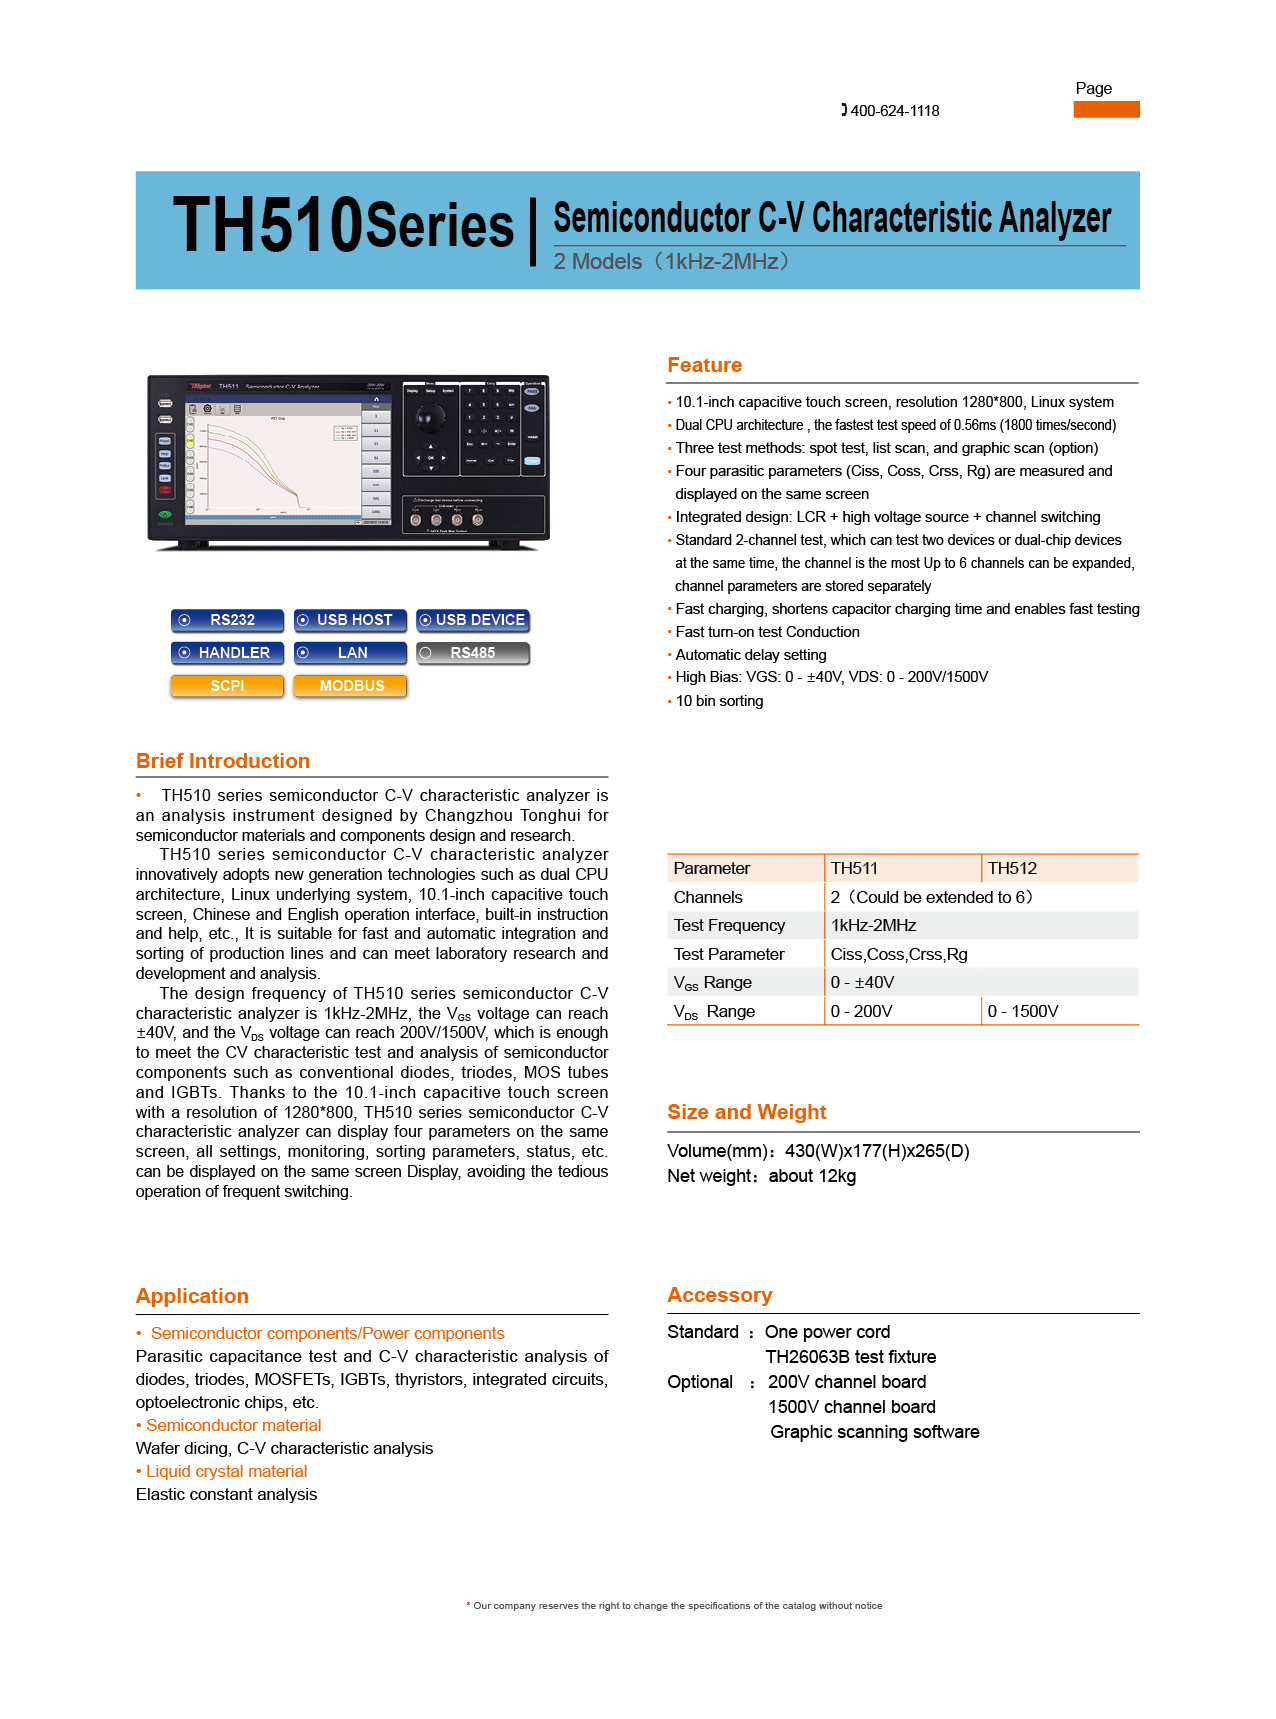 TH510 Series Semiconductor C-V Characteristic Analyzer